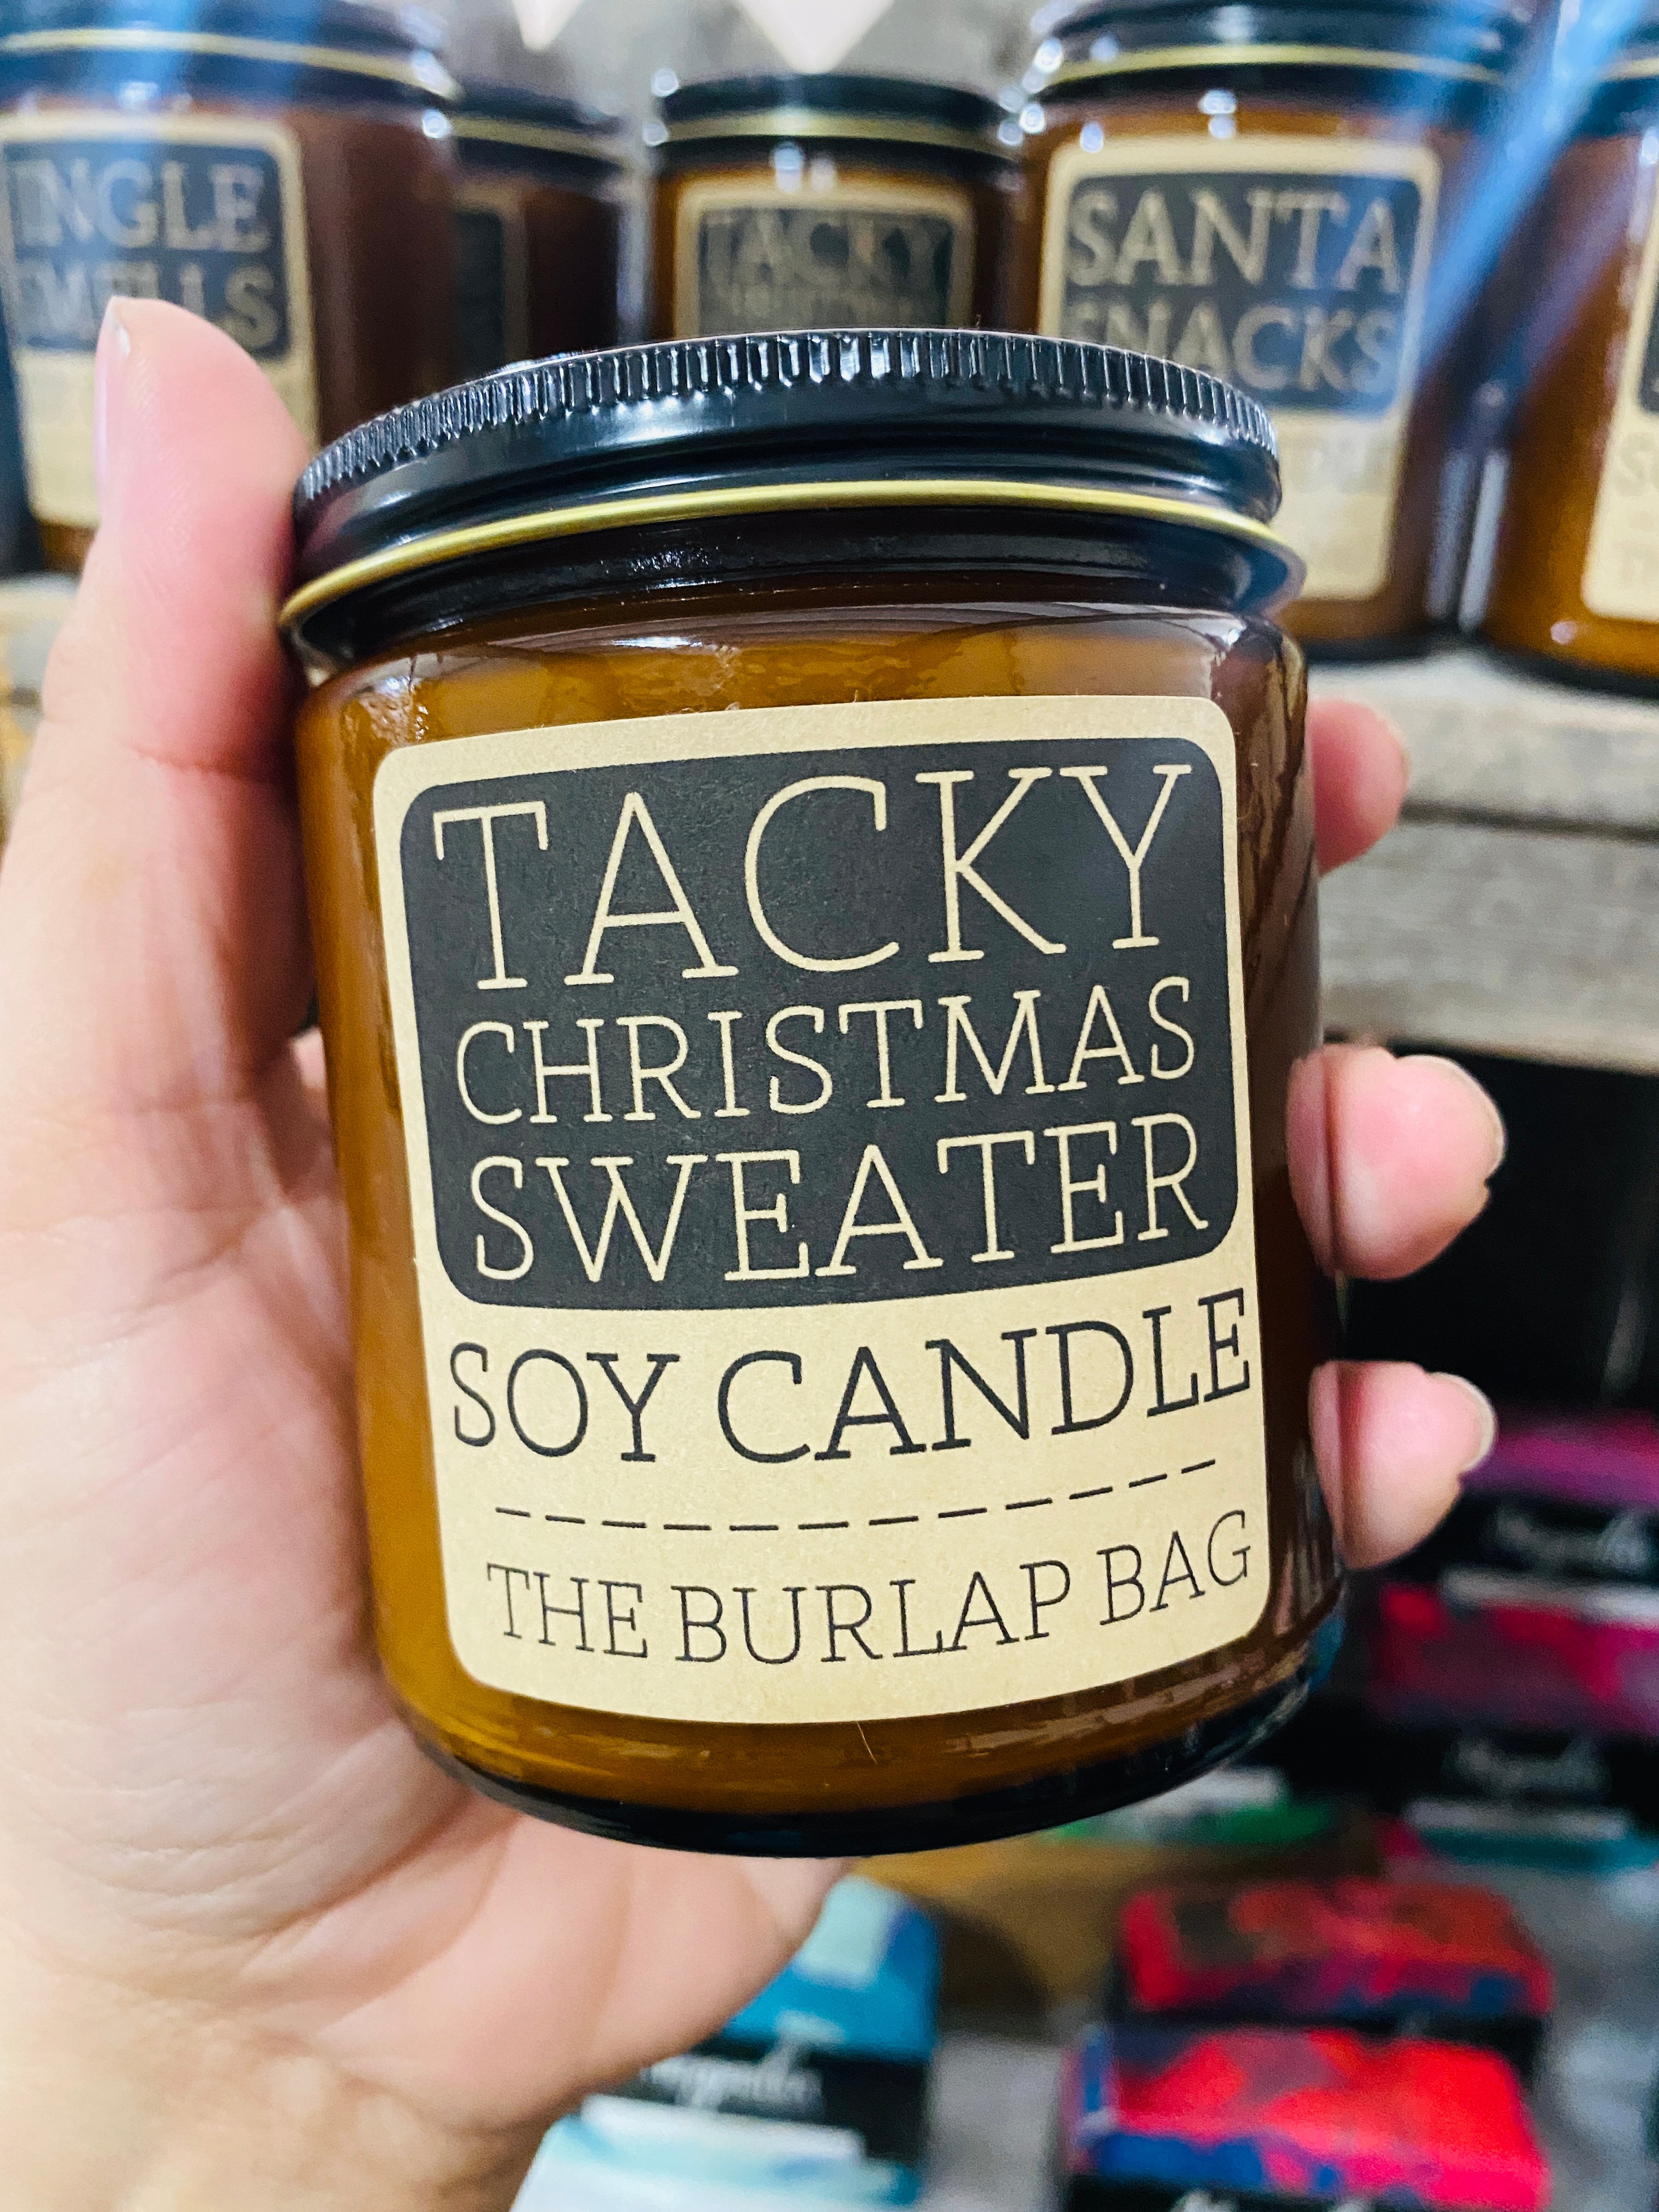 Tacky Christmas Sweater The Burlap Bag Soy Candle